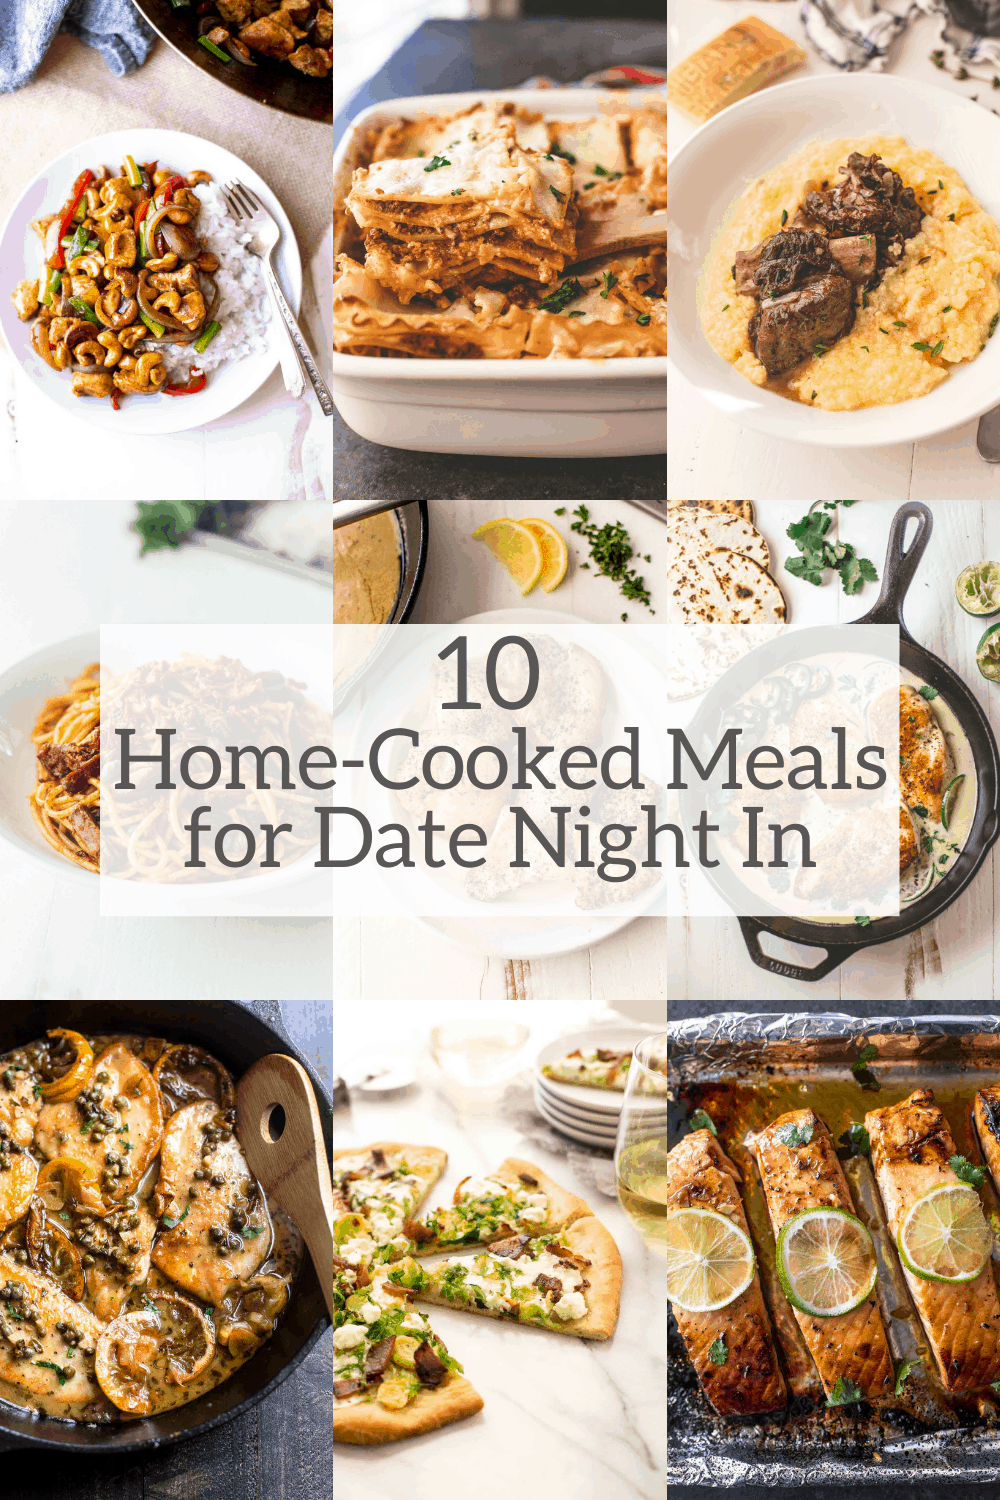 10 Home-Cooked Meals for Date Night In